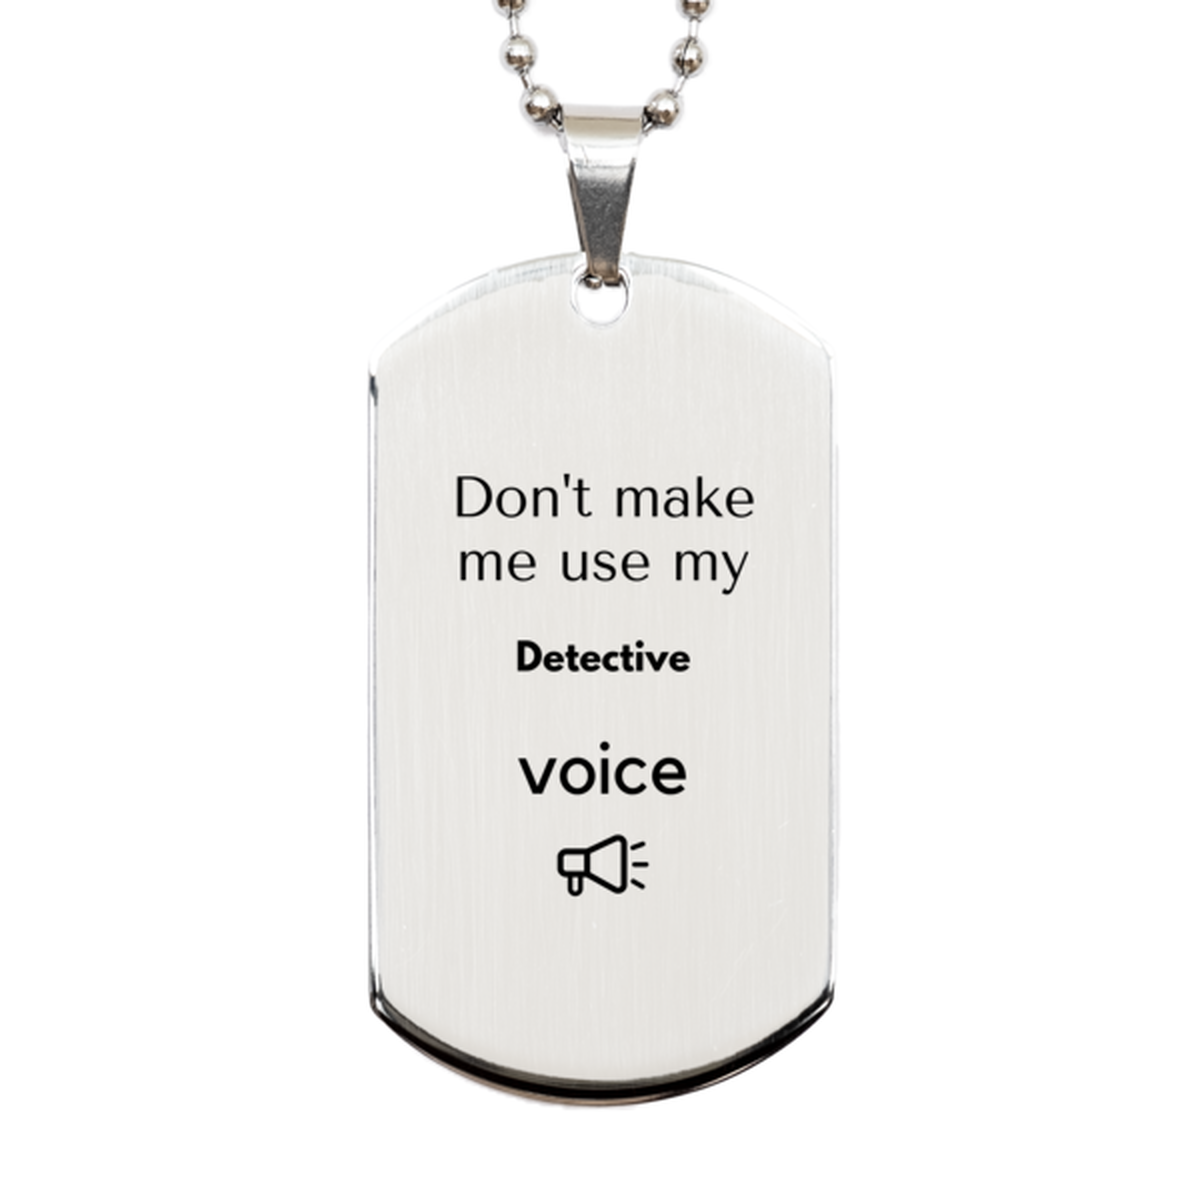 Don't make me use my Detective voice, Sarcasm Detective Gifts, Christmas Detective Silver Dog Tag Birthday Unique Gifts For Detective Coworkers, Men, Women, Colleague, Friends